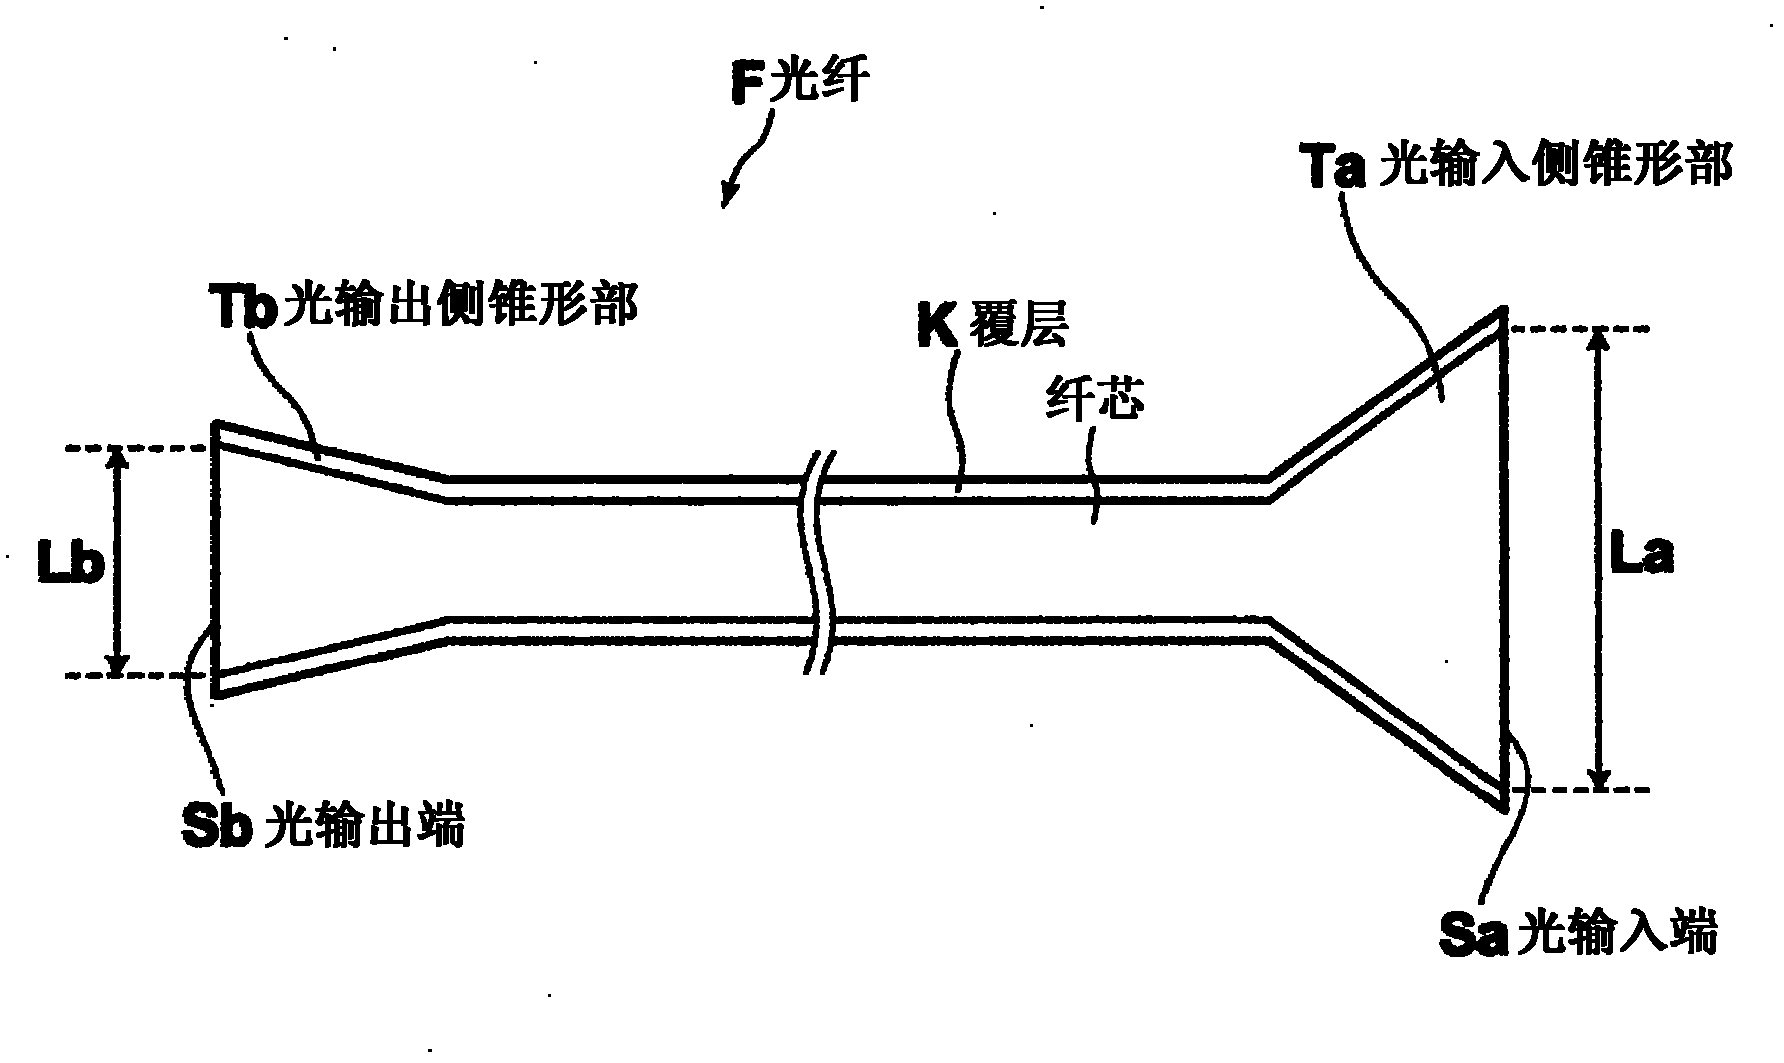 Light guide for endoscope, endoscope equipped with light guide, and method for producing light guide for endoscope